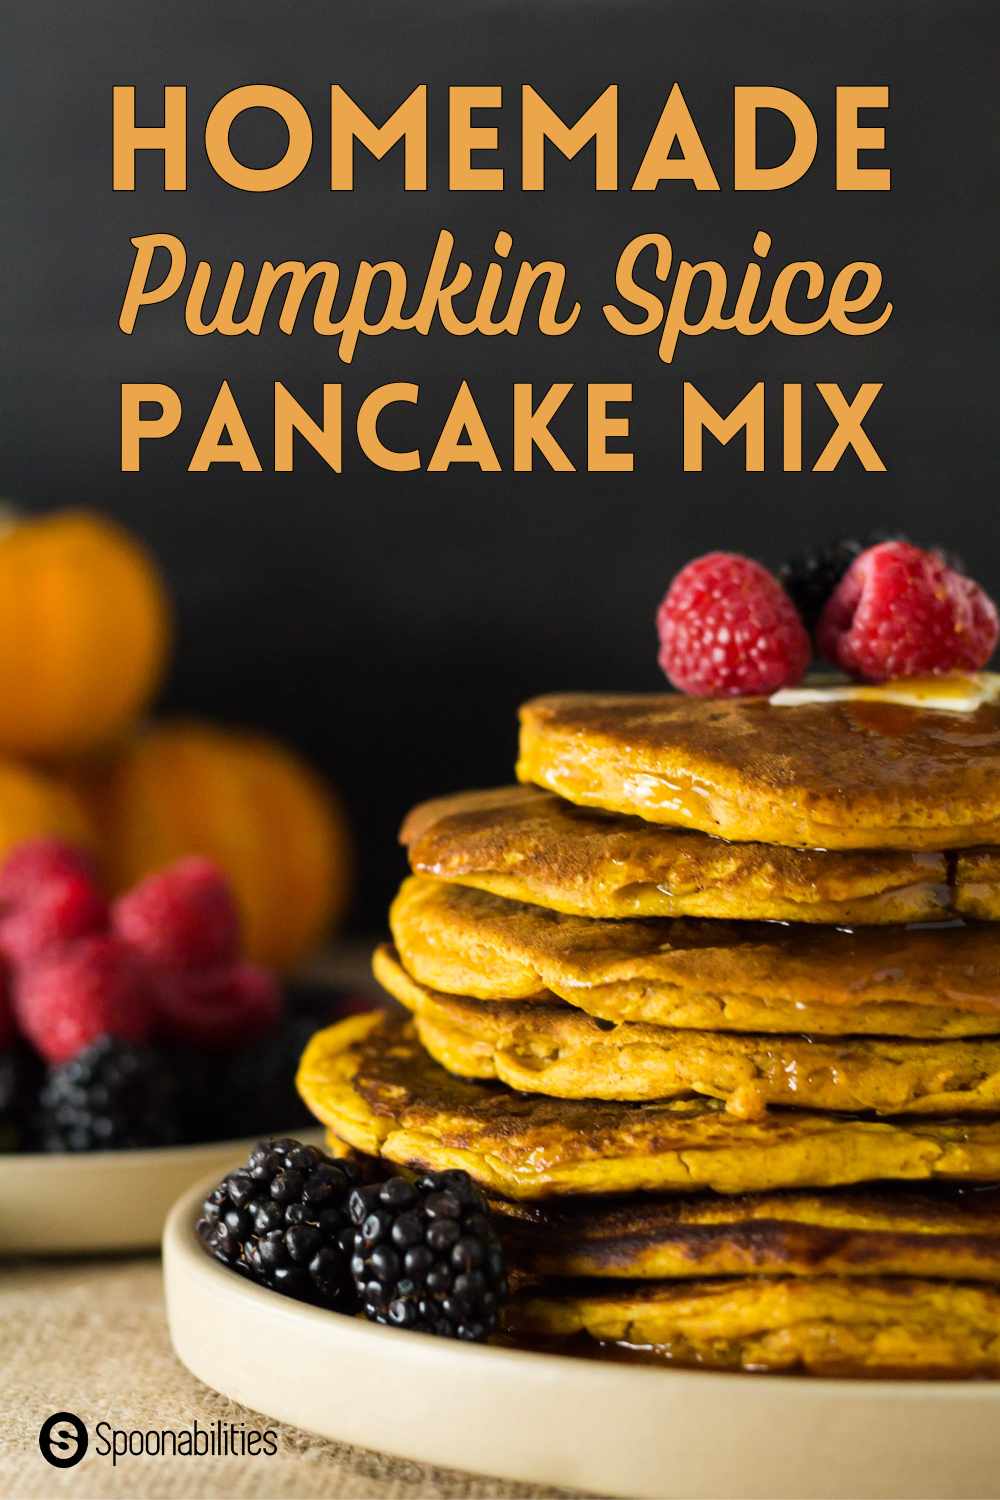 Pumpkin spice pancakes on a white plate with mixed berries and syrup